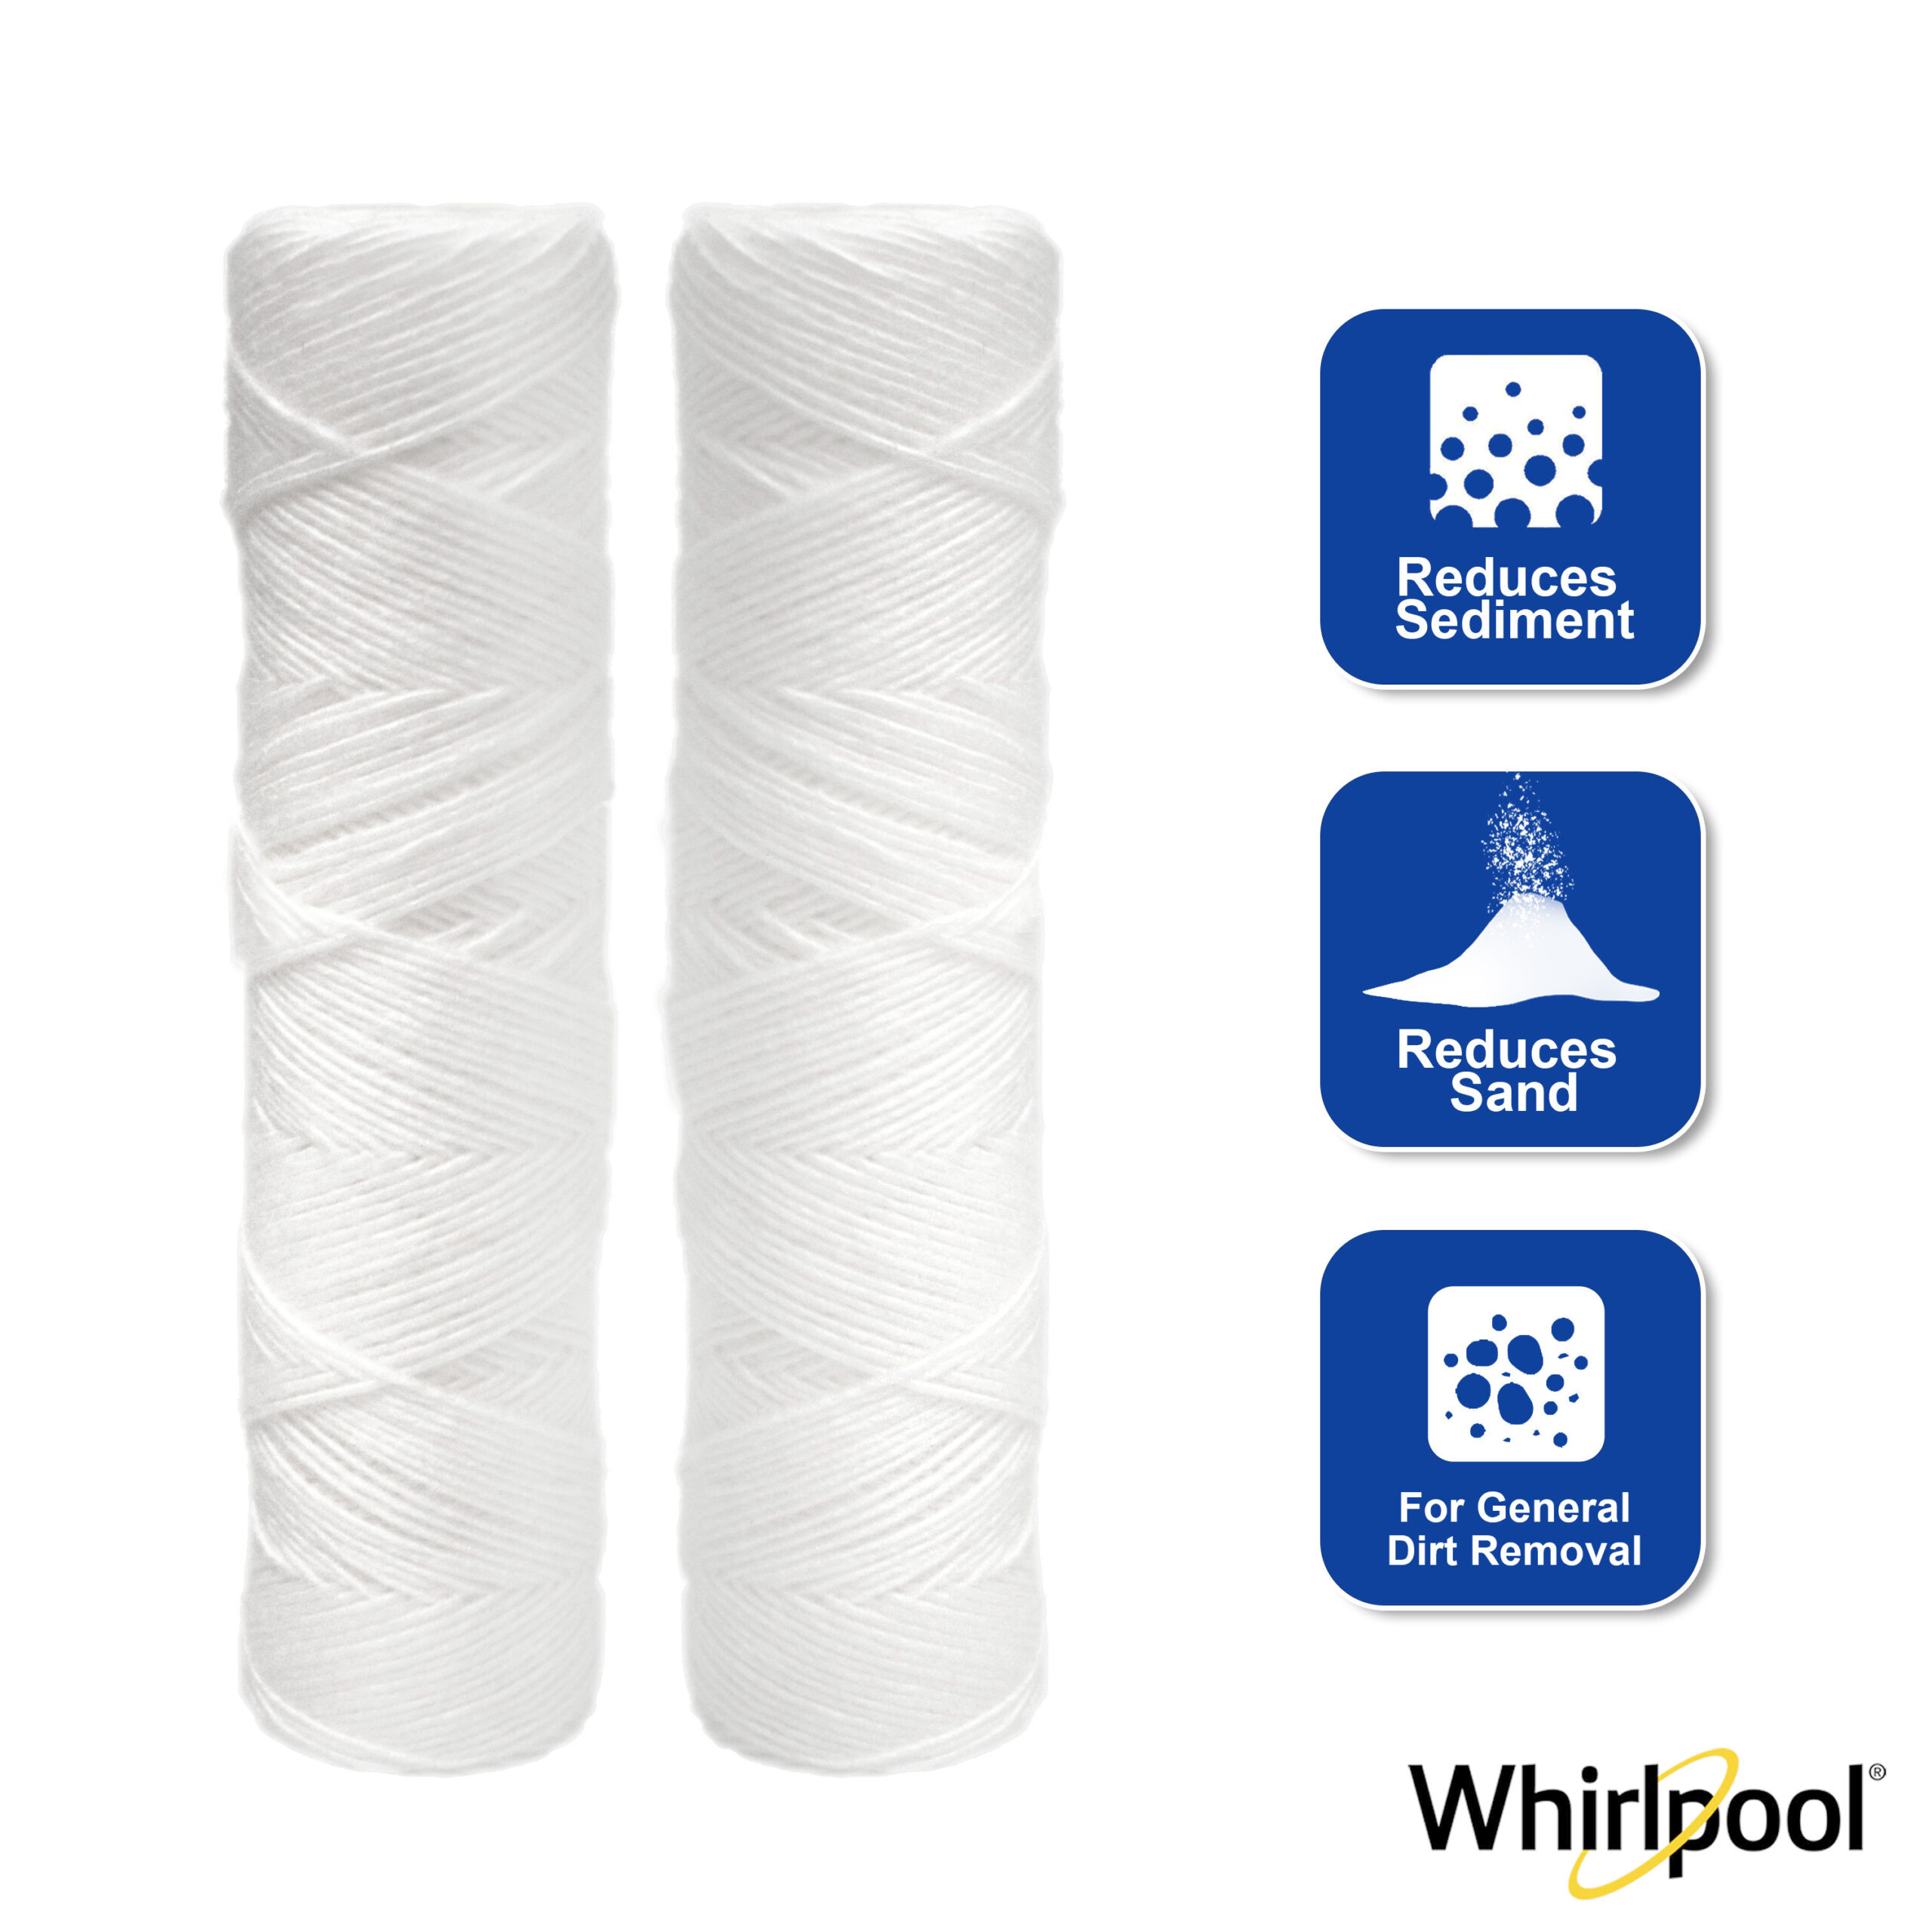 Whirlpool WHKF-WHSW String Wound Filter - Whirlpool® Water Filtration